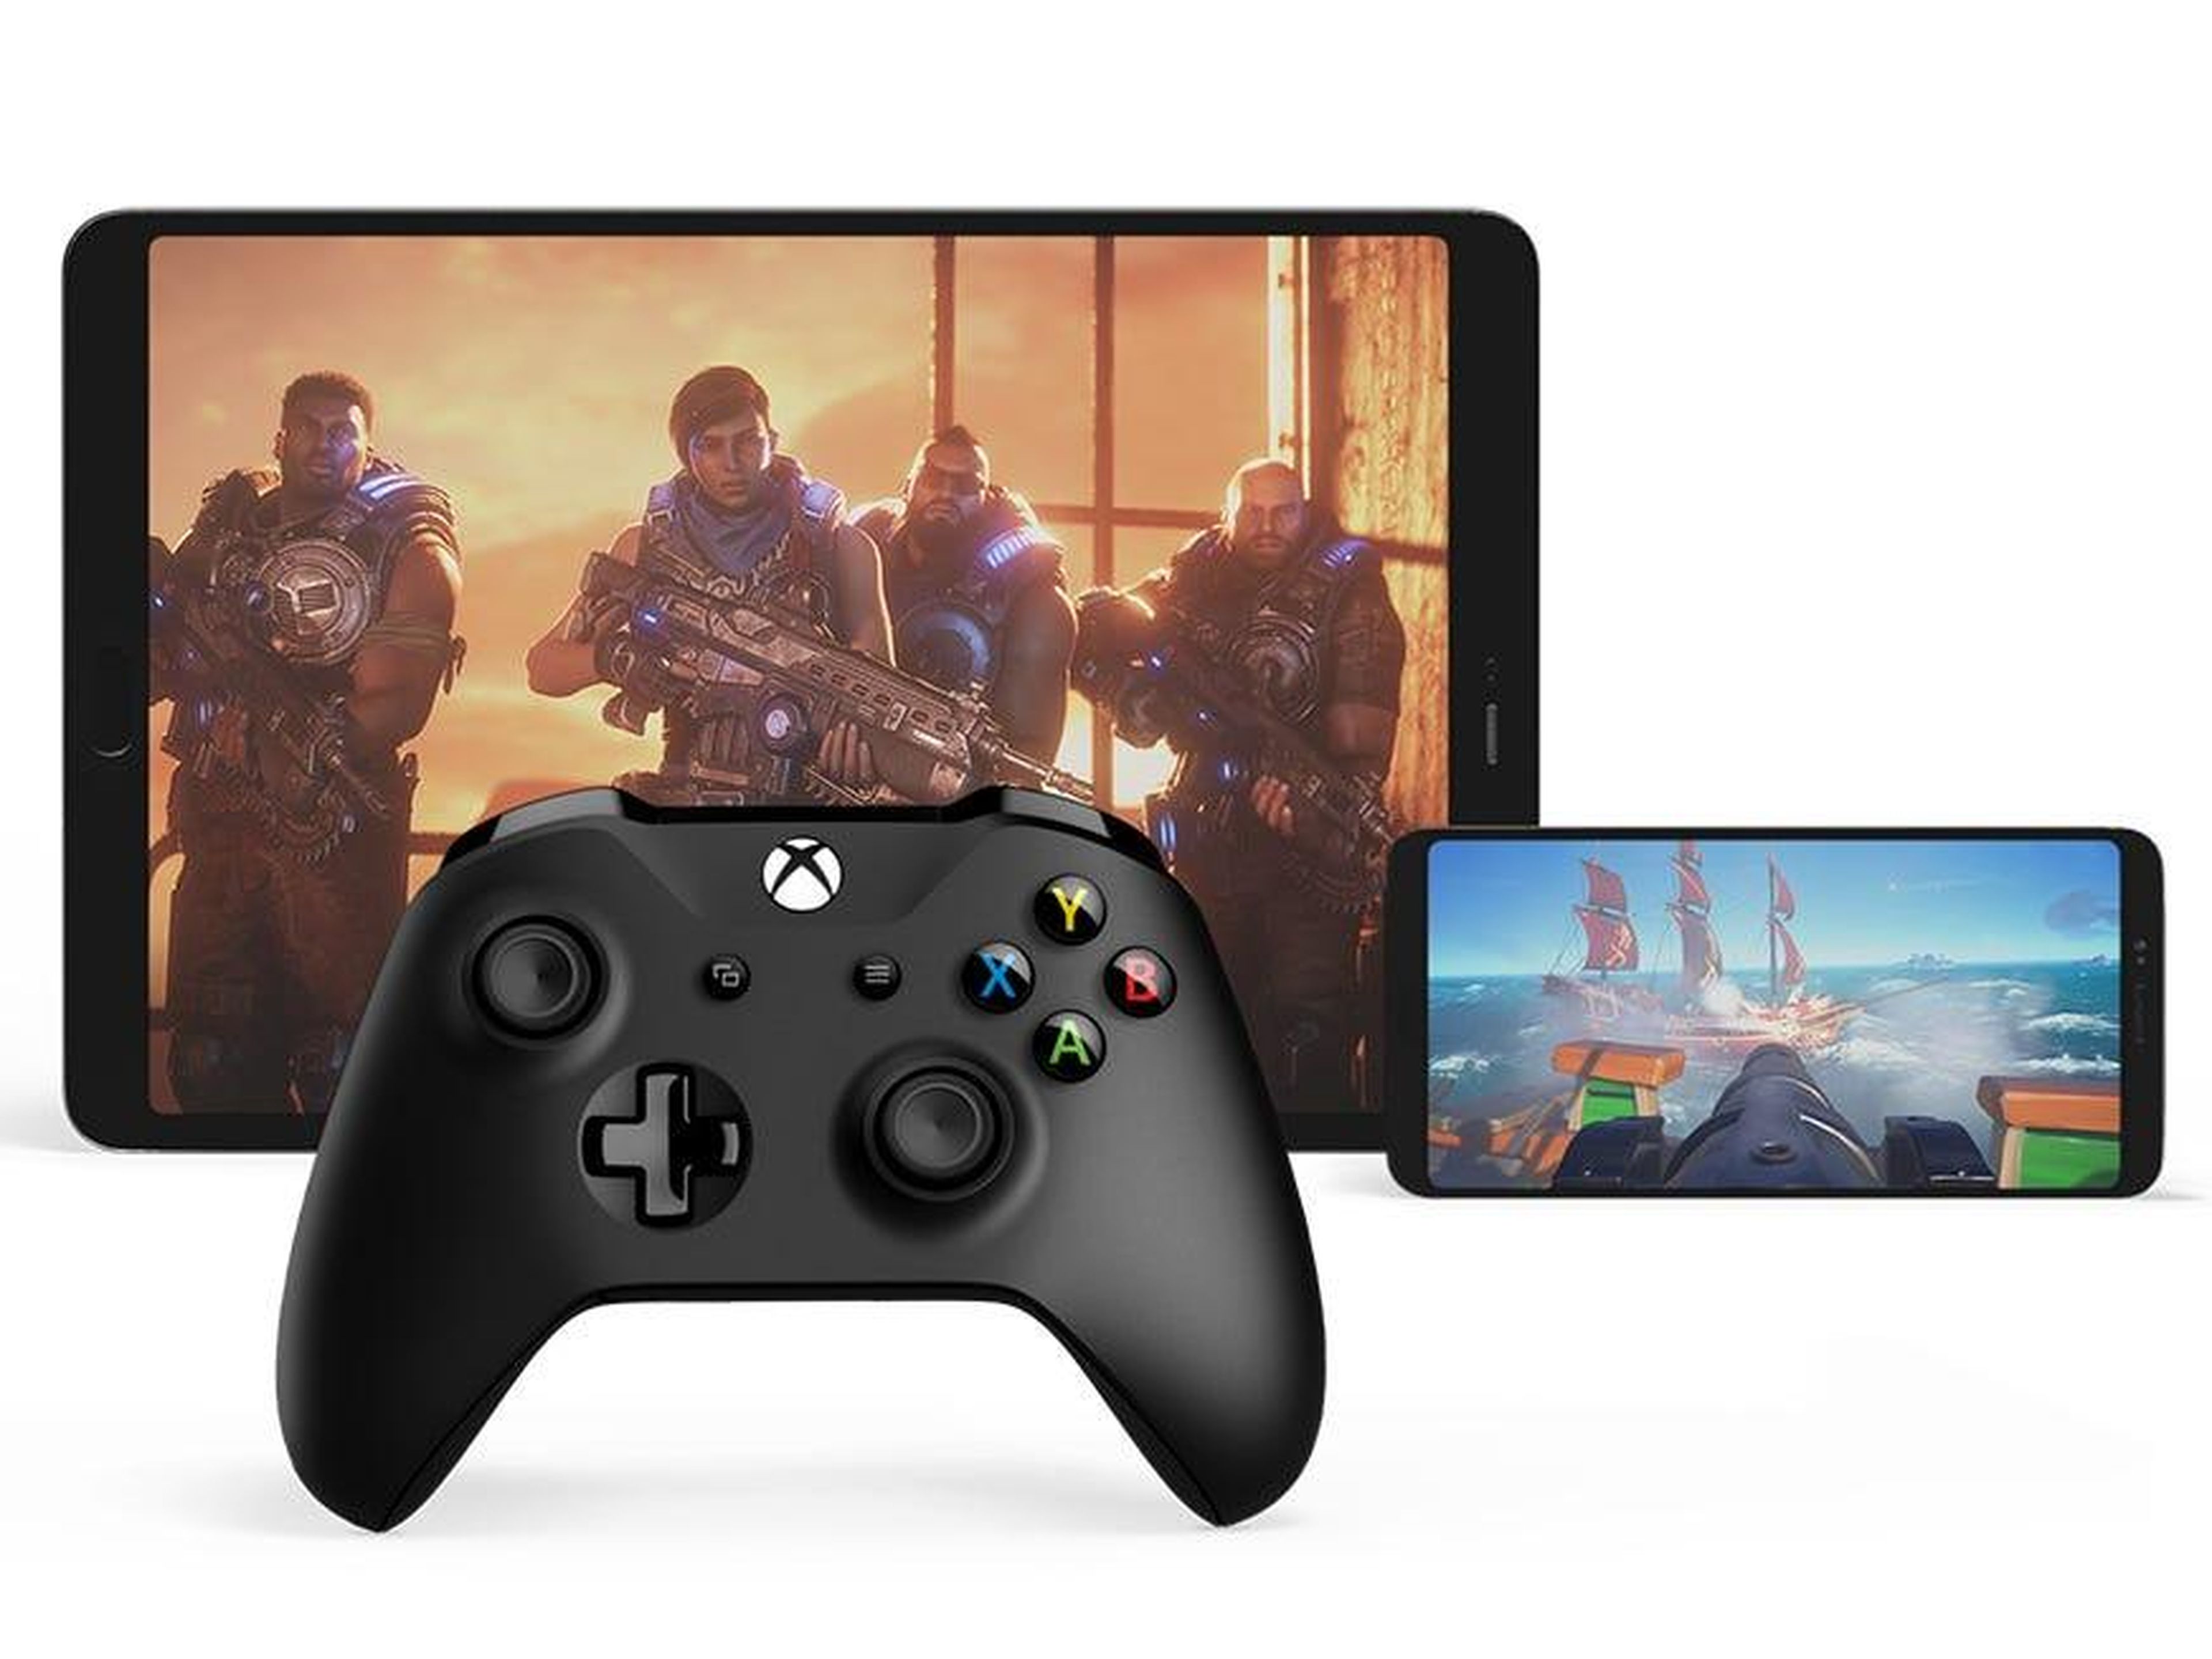 Microsoft's 'Netflix of gaming' service finally launches in September, and it'll give access to over 100 Xbox games from your phone, tablet, or console for $15/month